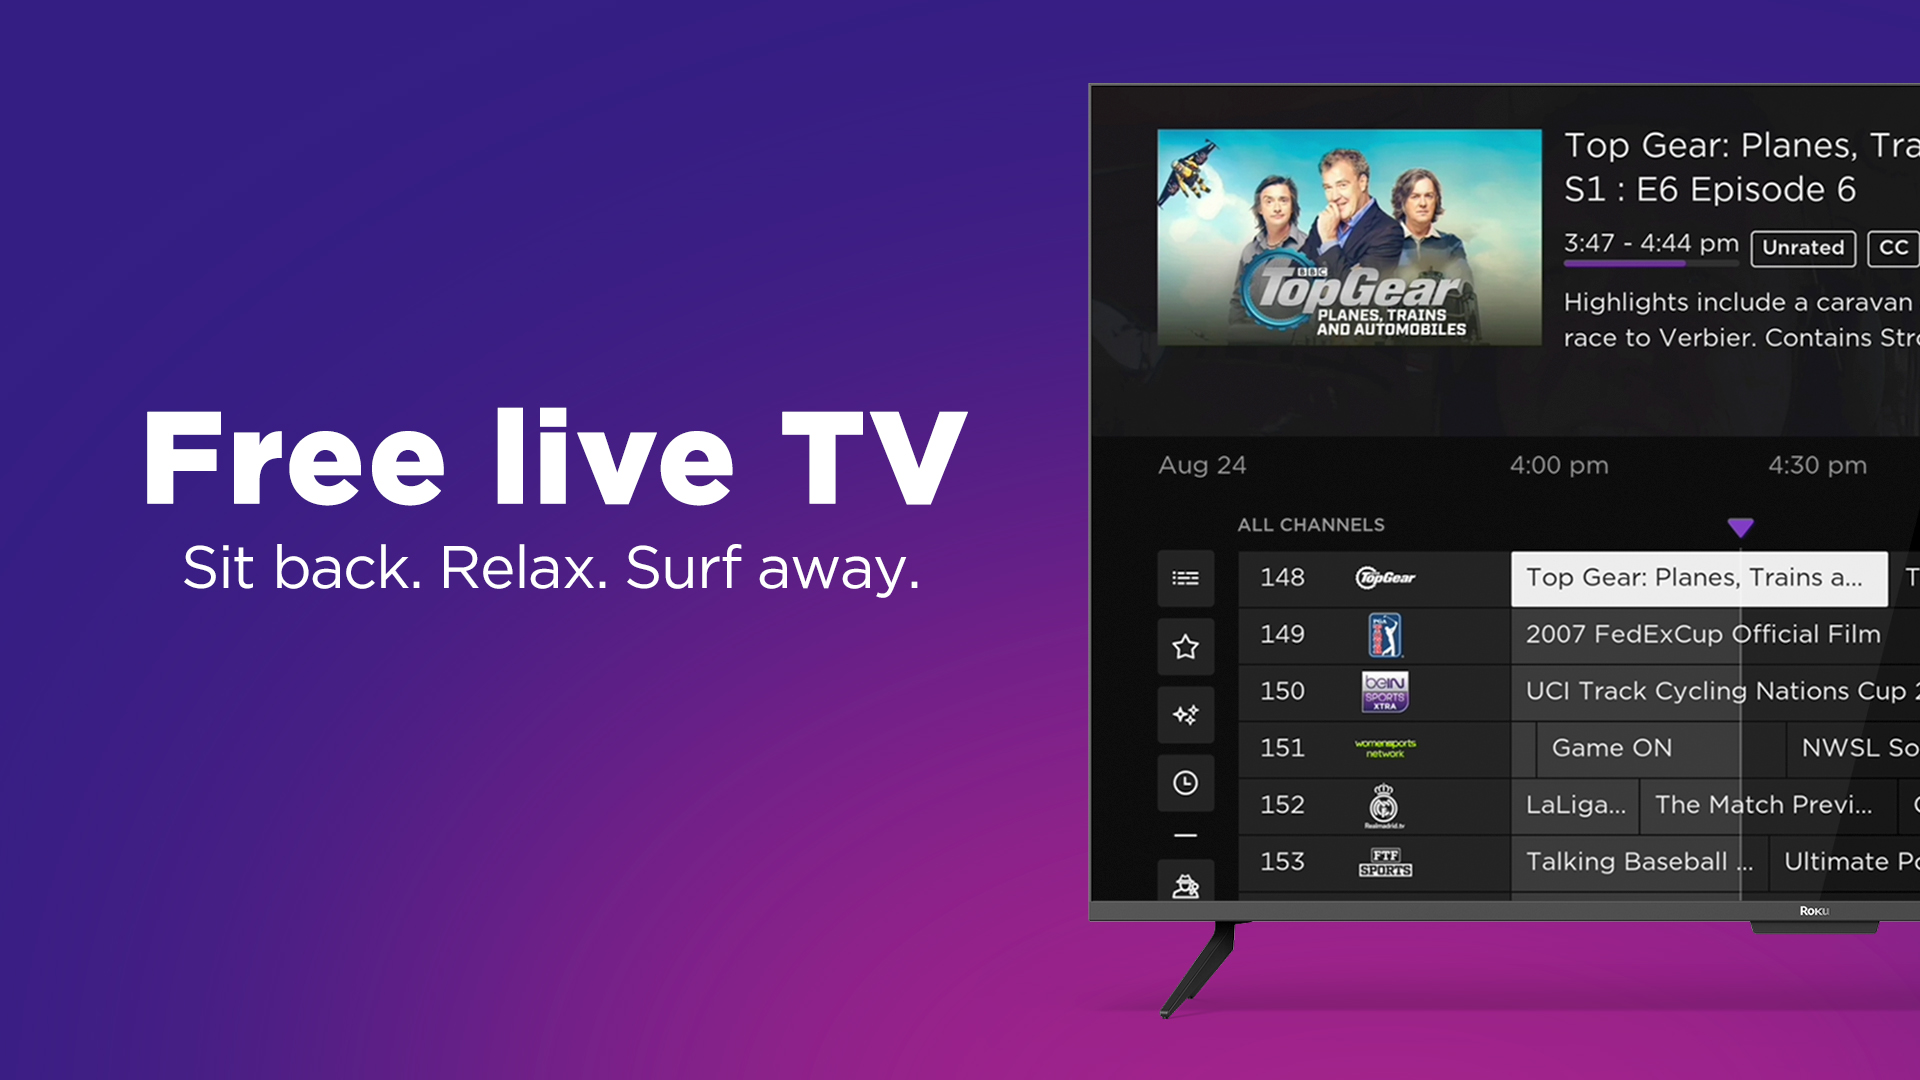 Stream free Live TV. Seriously—it's free.